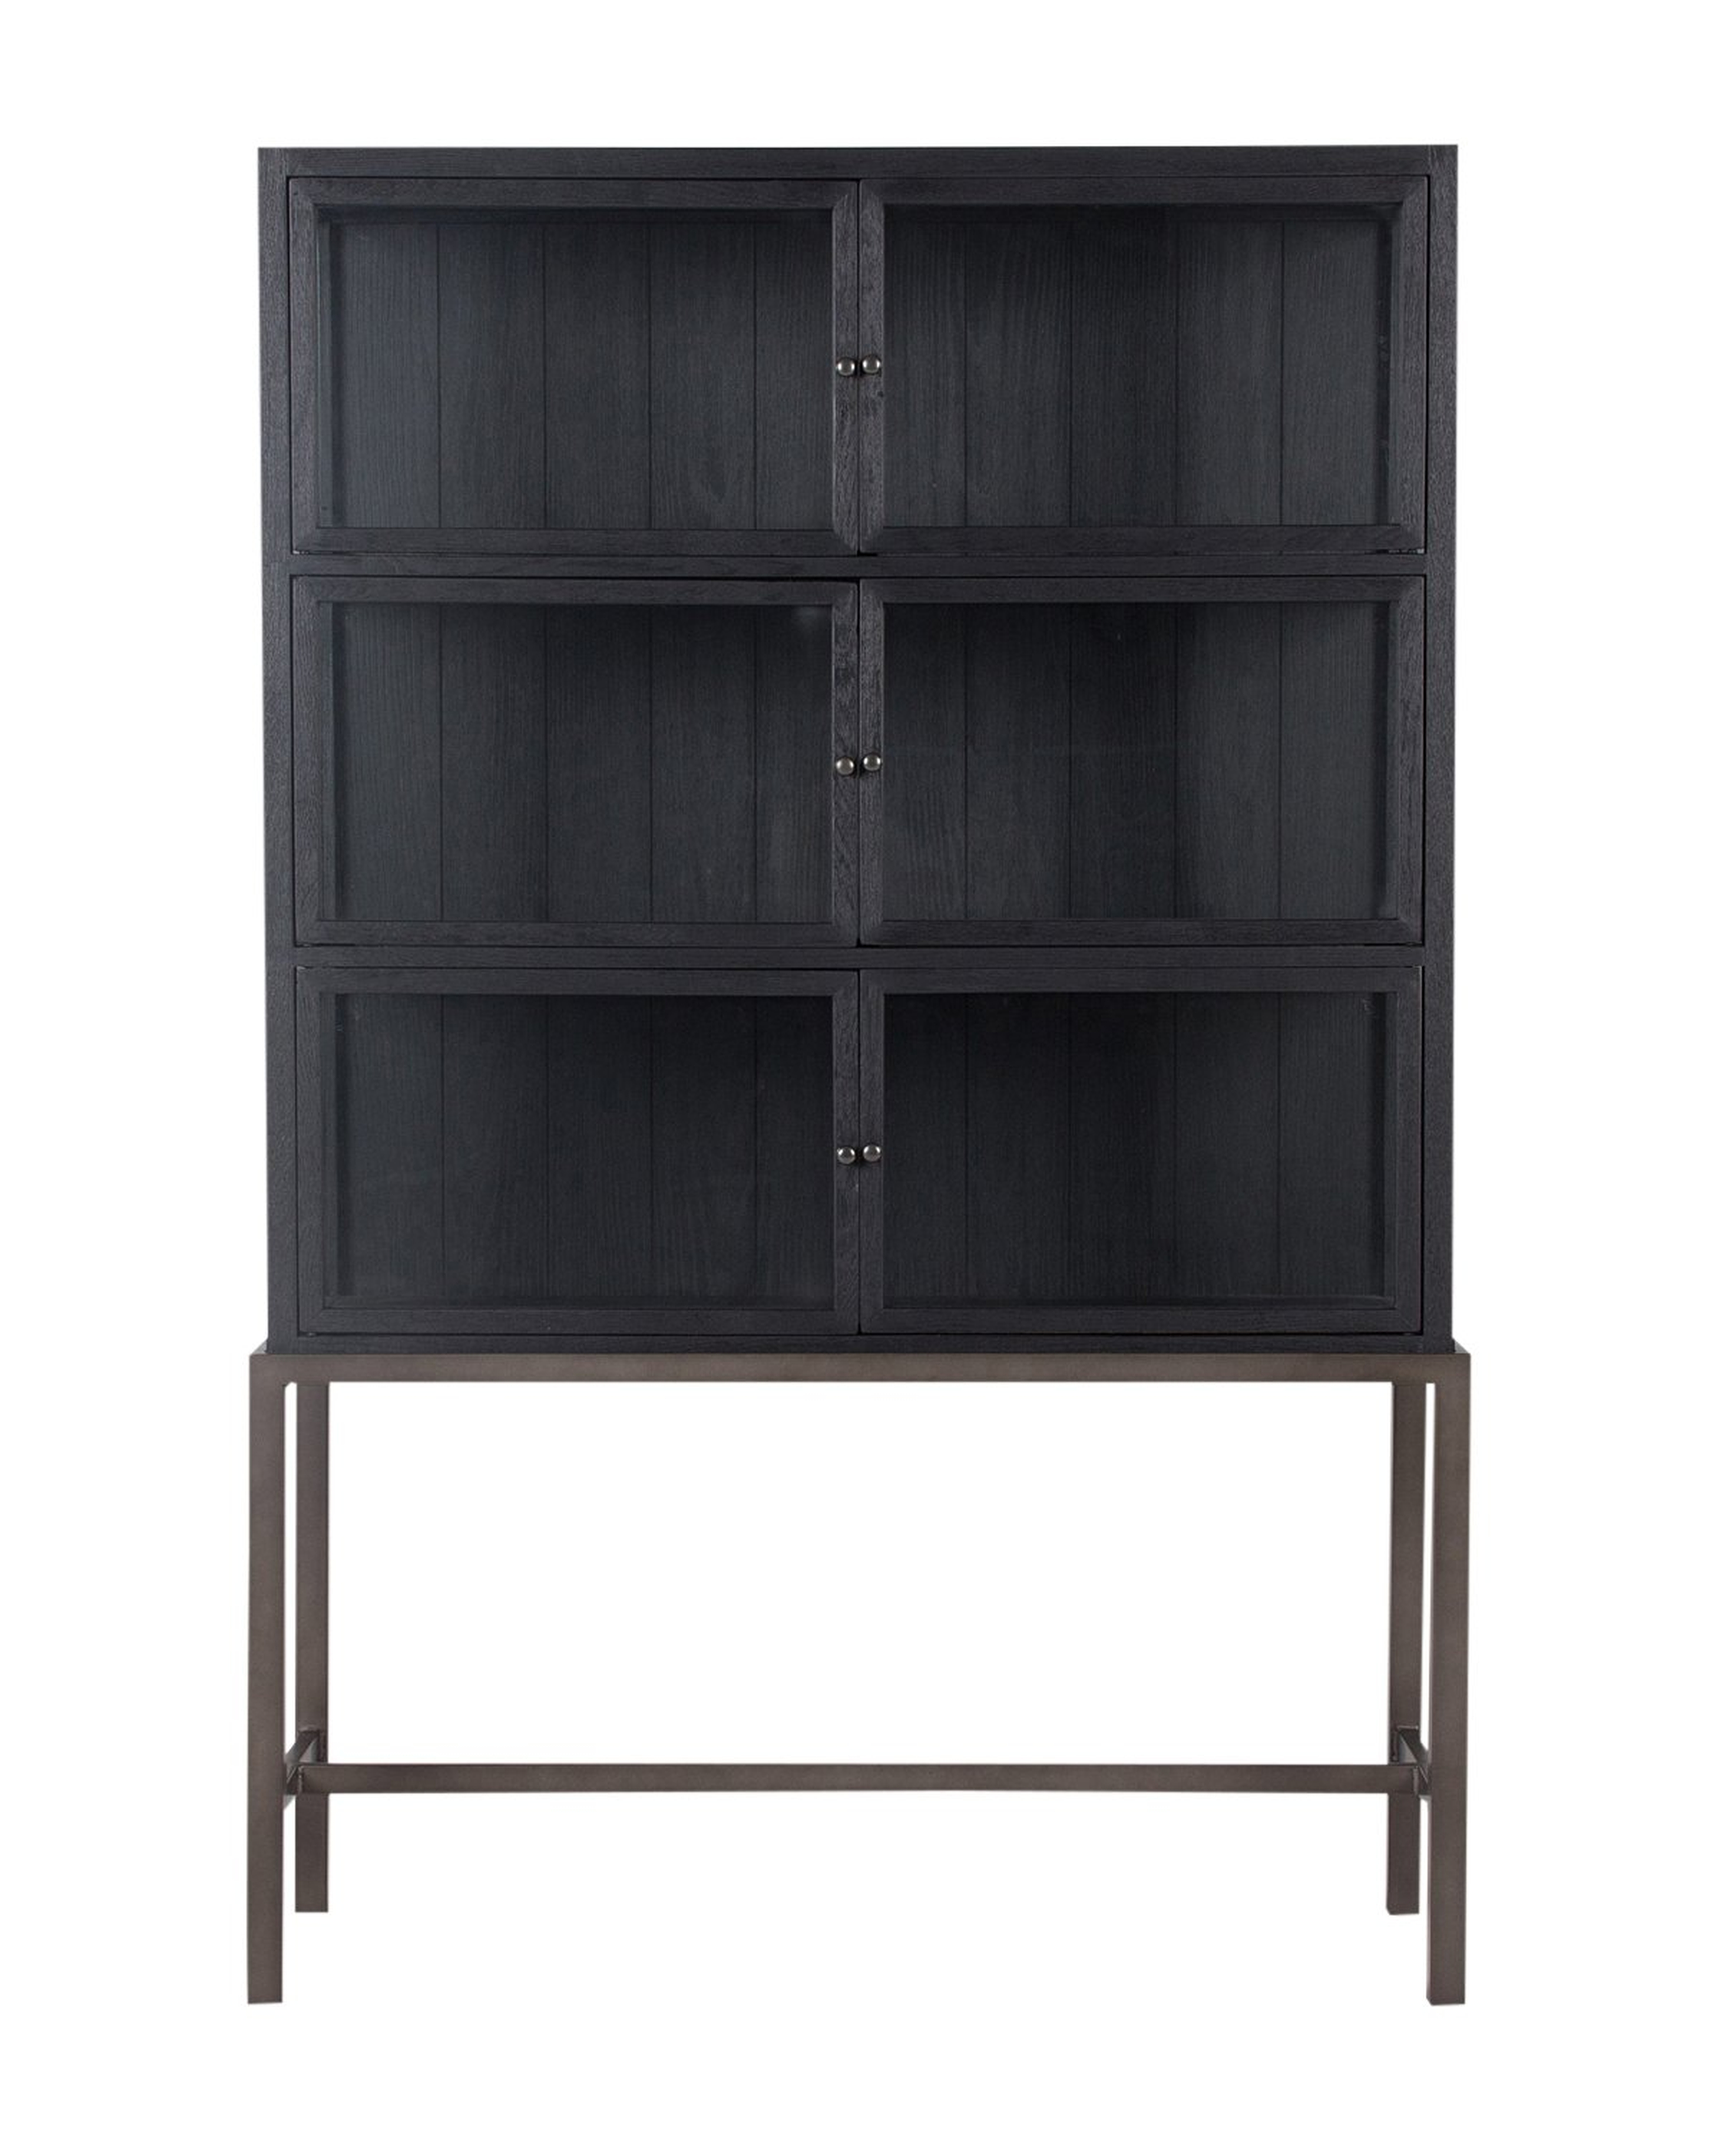 LAWLEY CABINET, DRIFTED BLACK - McGee & Co.